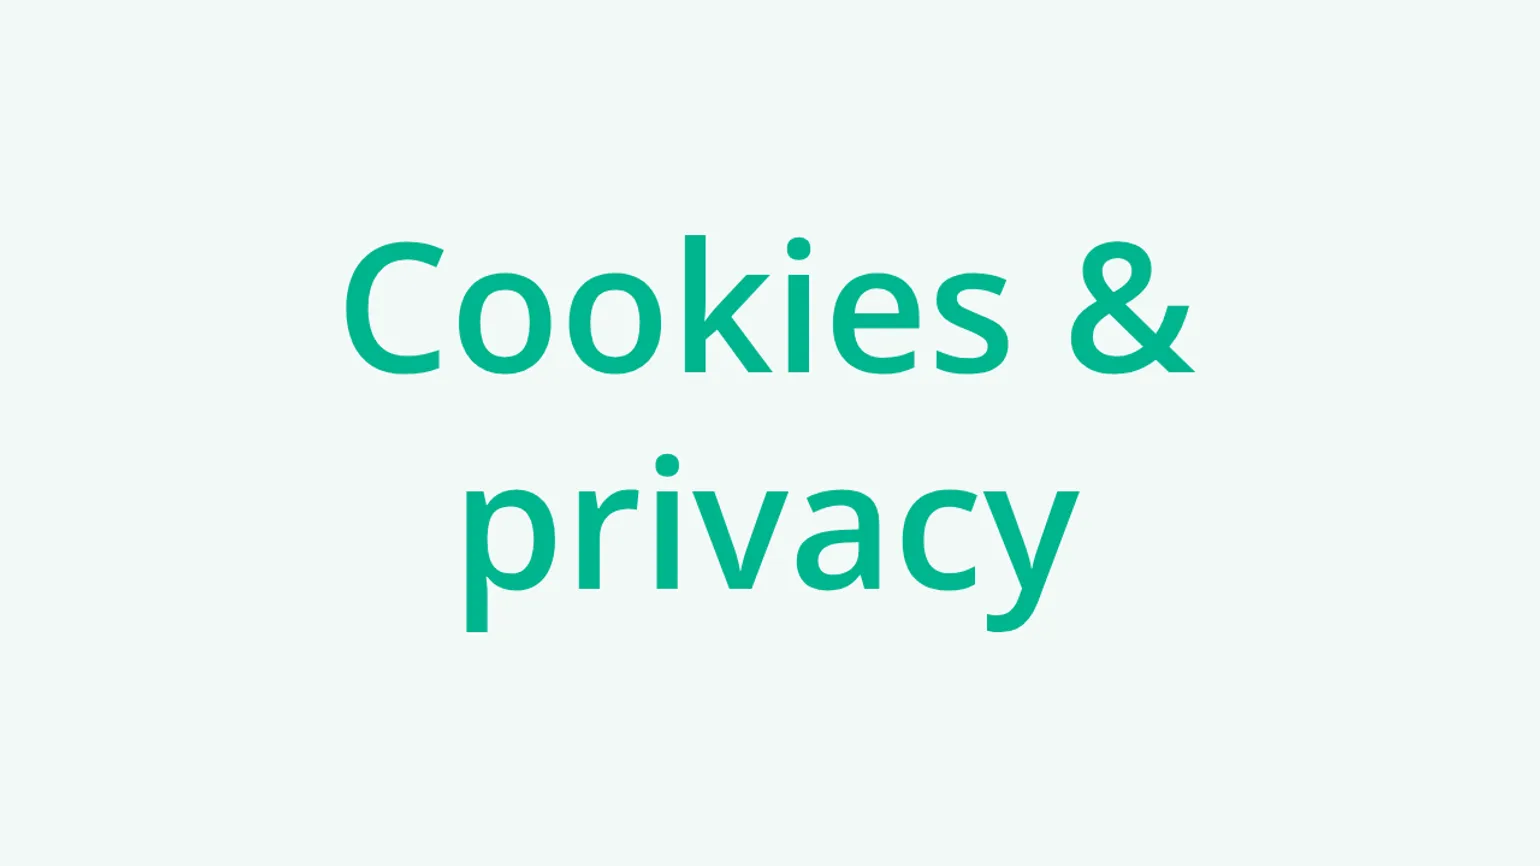 Cookies and privacy